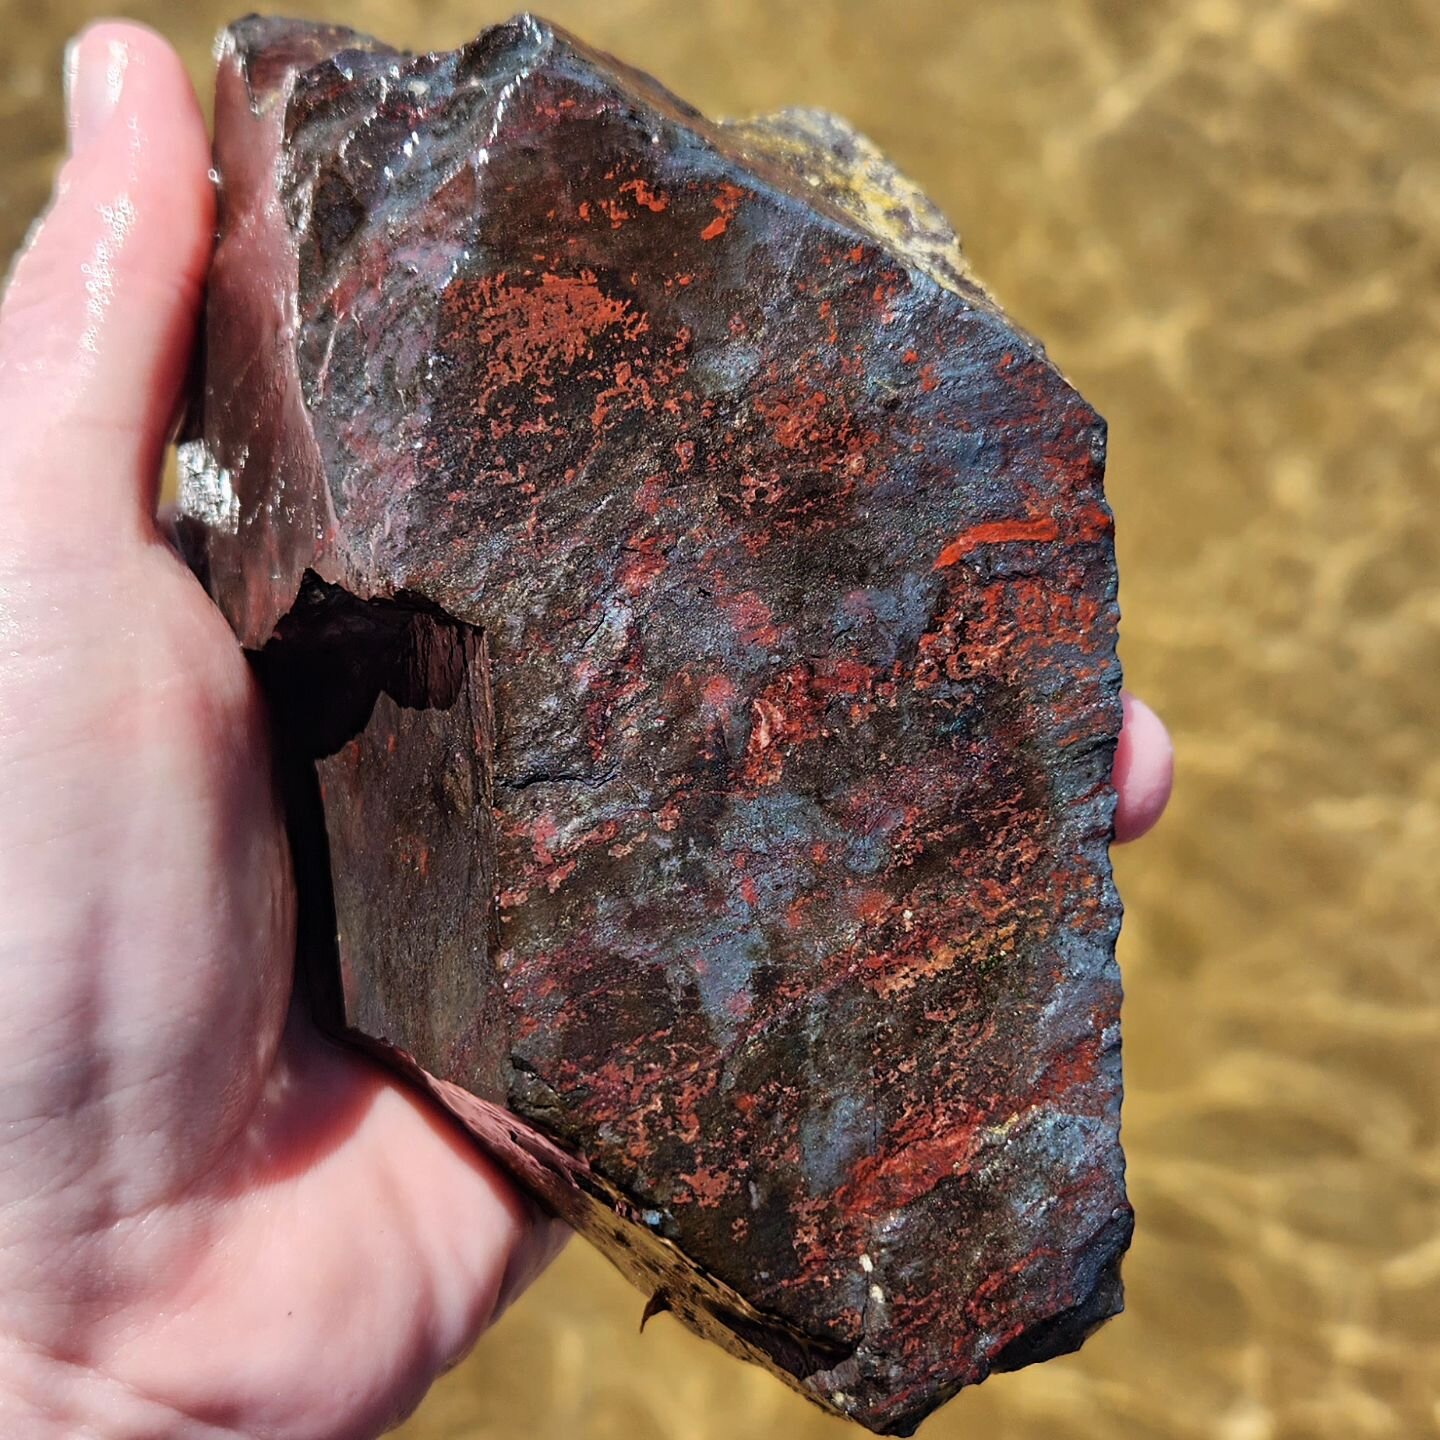 Greetings everyone! It's been quite some time since our last post here&mdash; much has happened but we're glad to finally be back! Enjoy this chunk of BiF we found at Tawas Point 😊